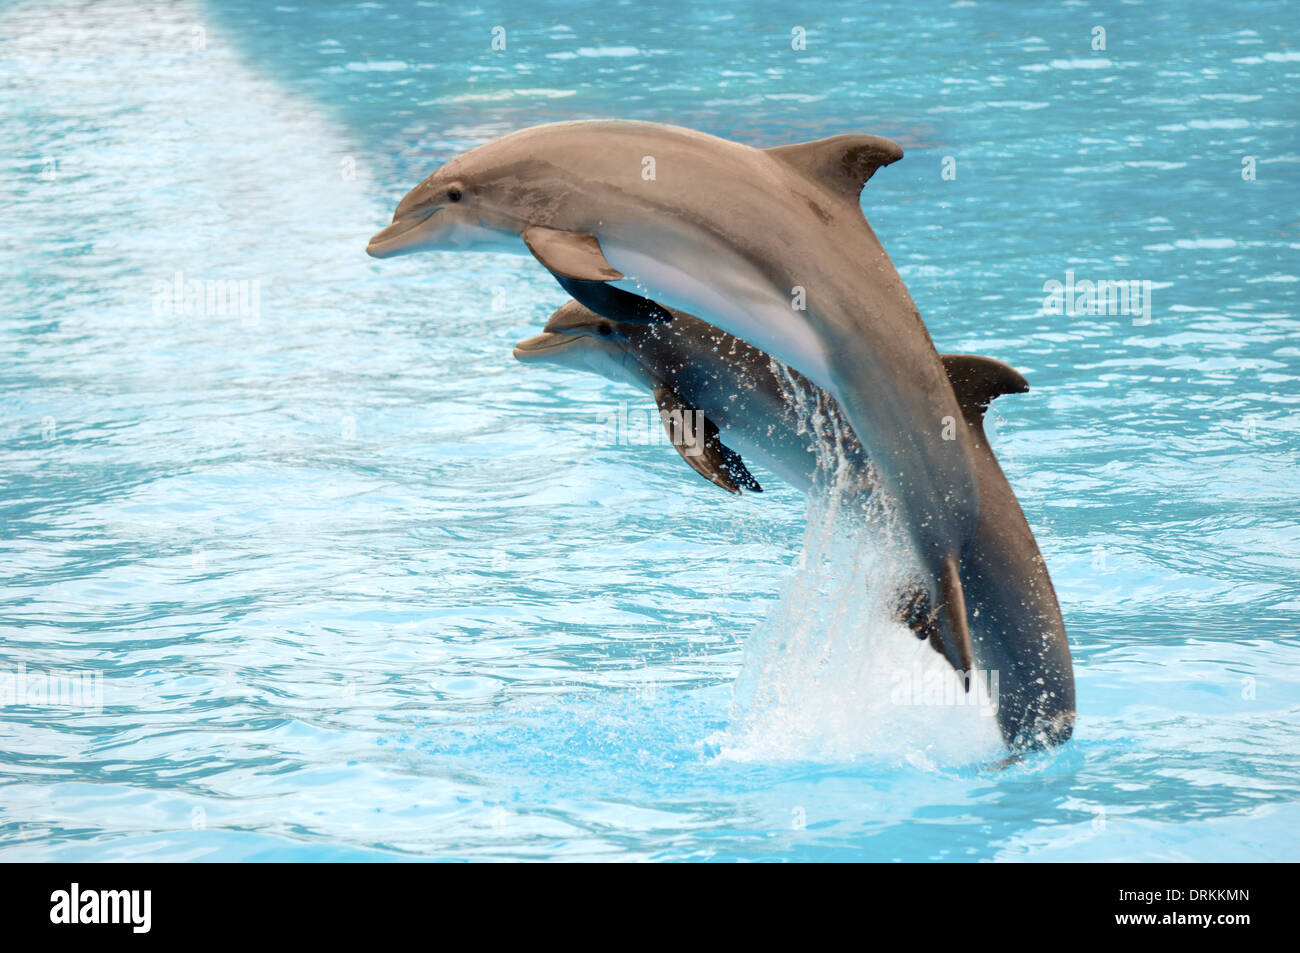 Two dolphins are jumping out of the water. Stock Photo